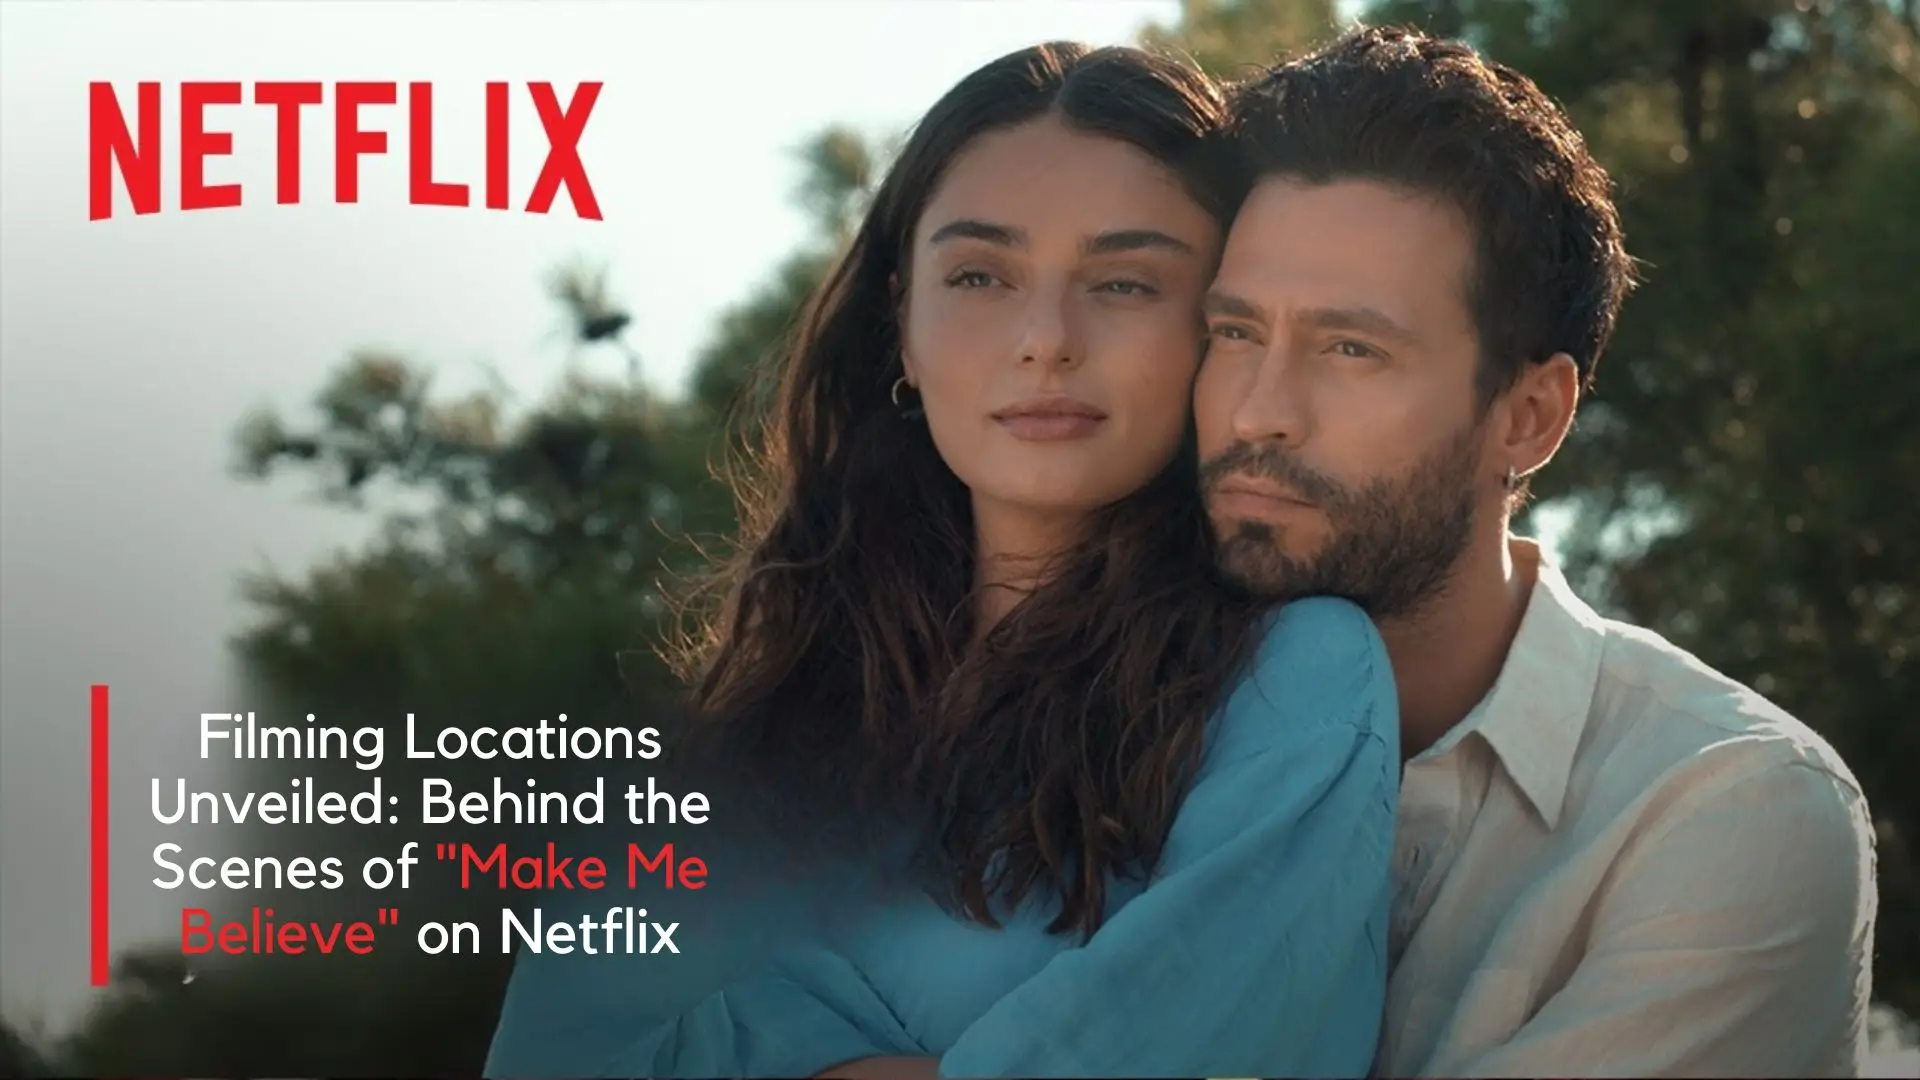 Filming Locations Unveiled: Behind the Scenes of "Make Me Believe" on Netflix